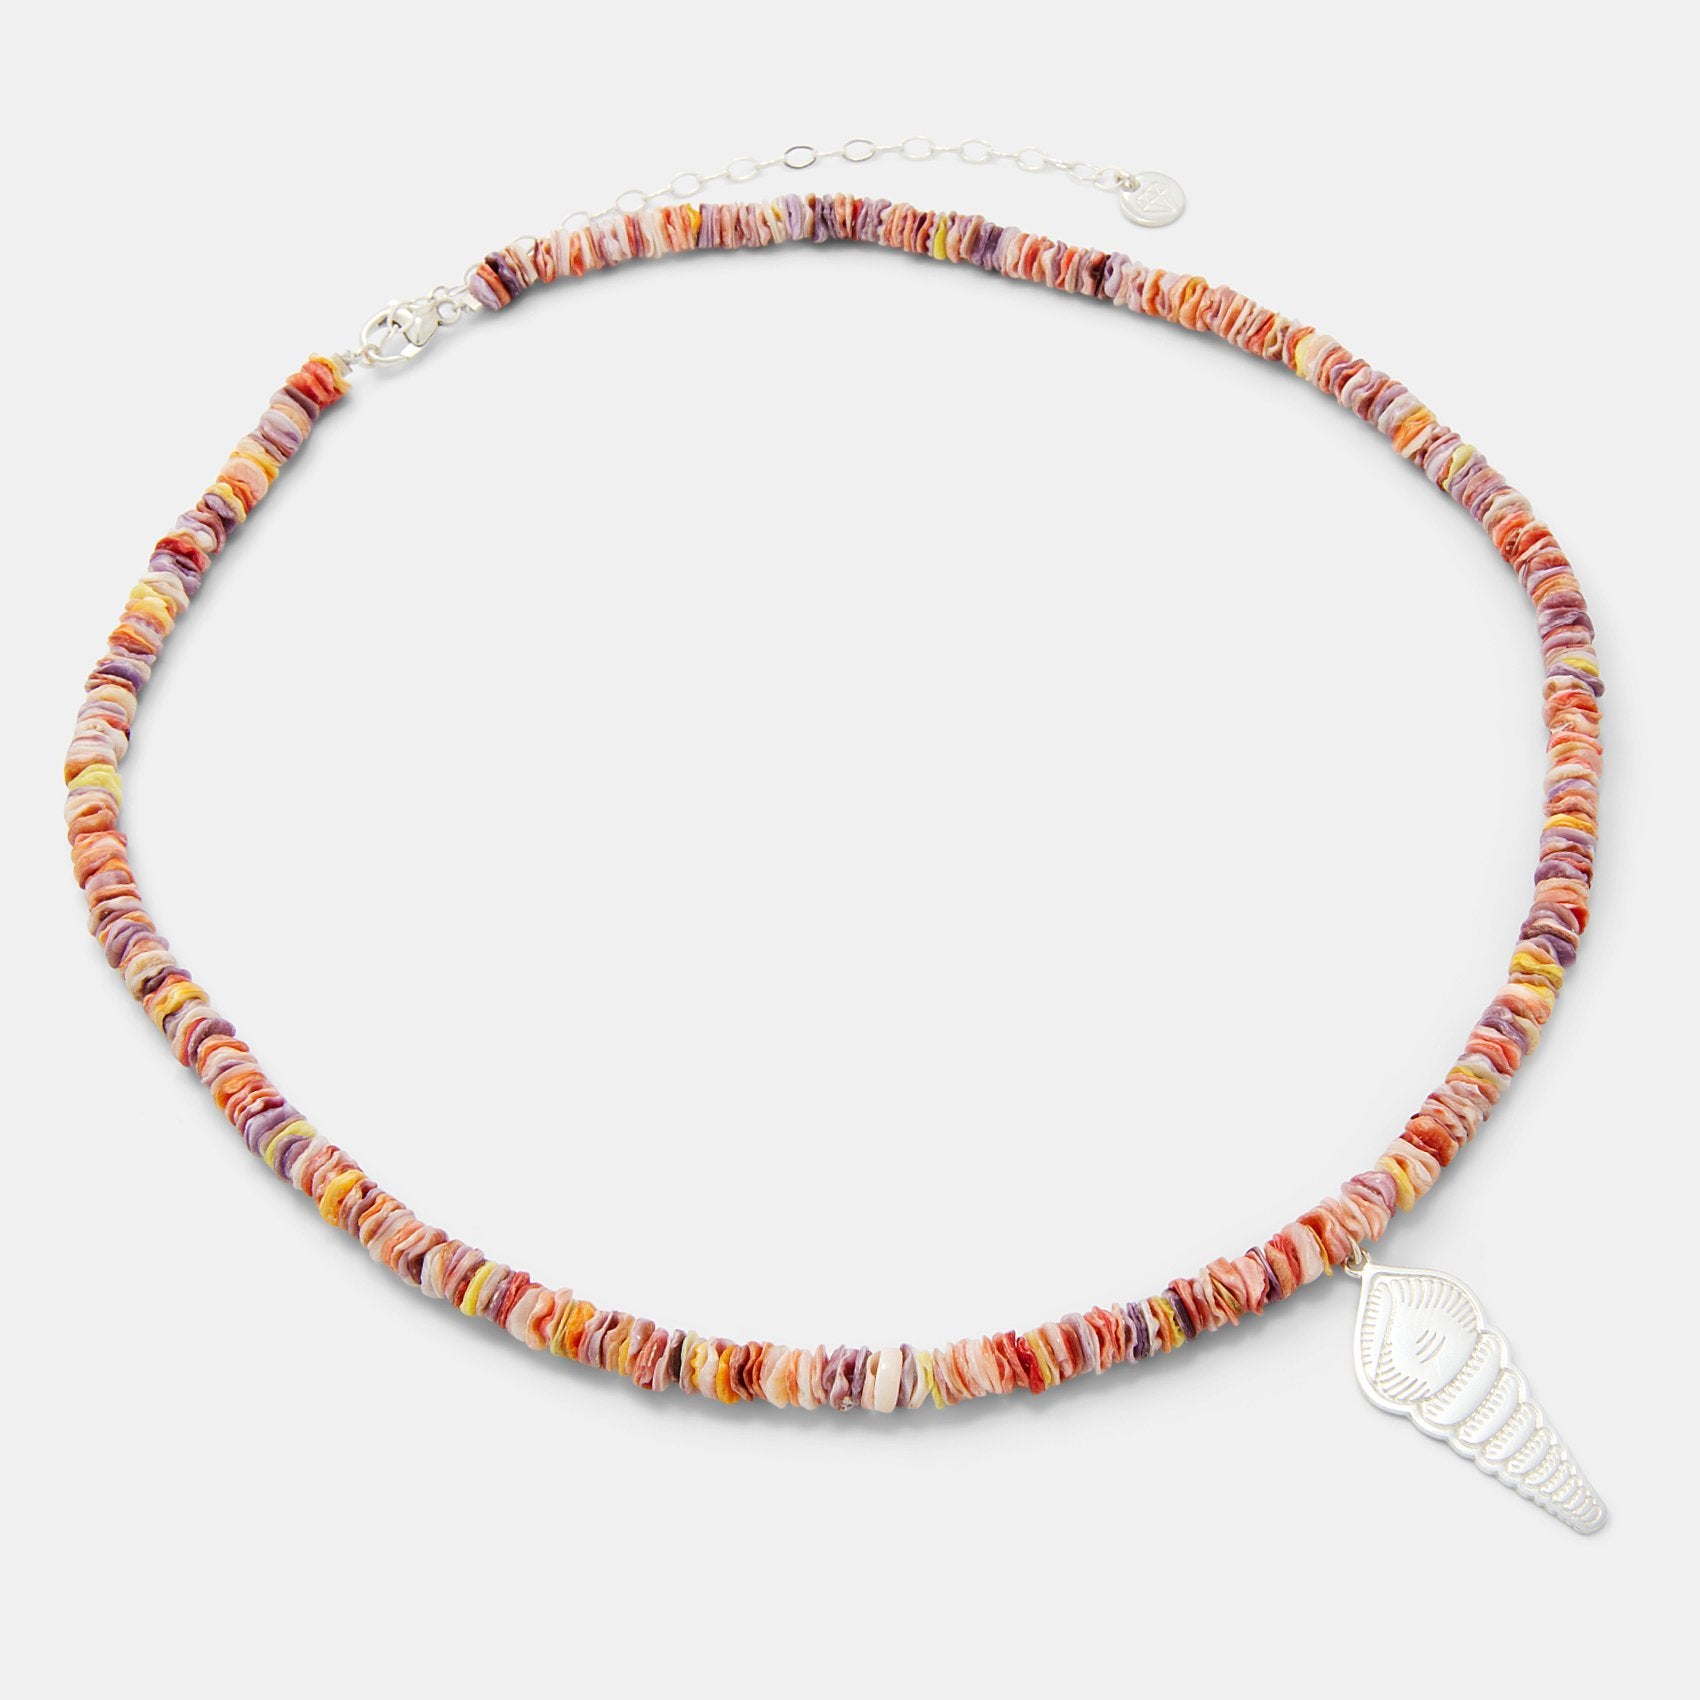 Spiral shell on scallop shell beaded necklace - Simone Walsh Jewellery Australia